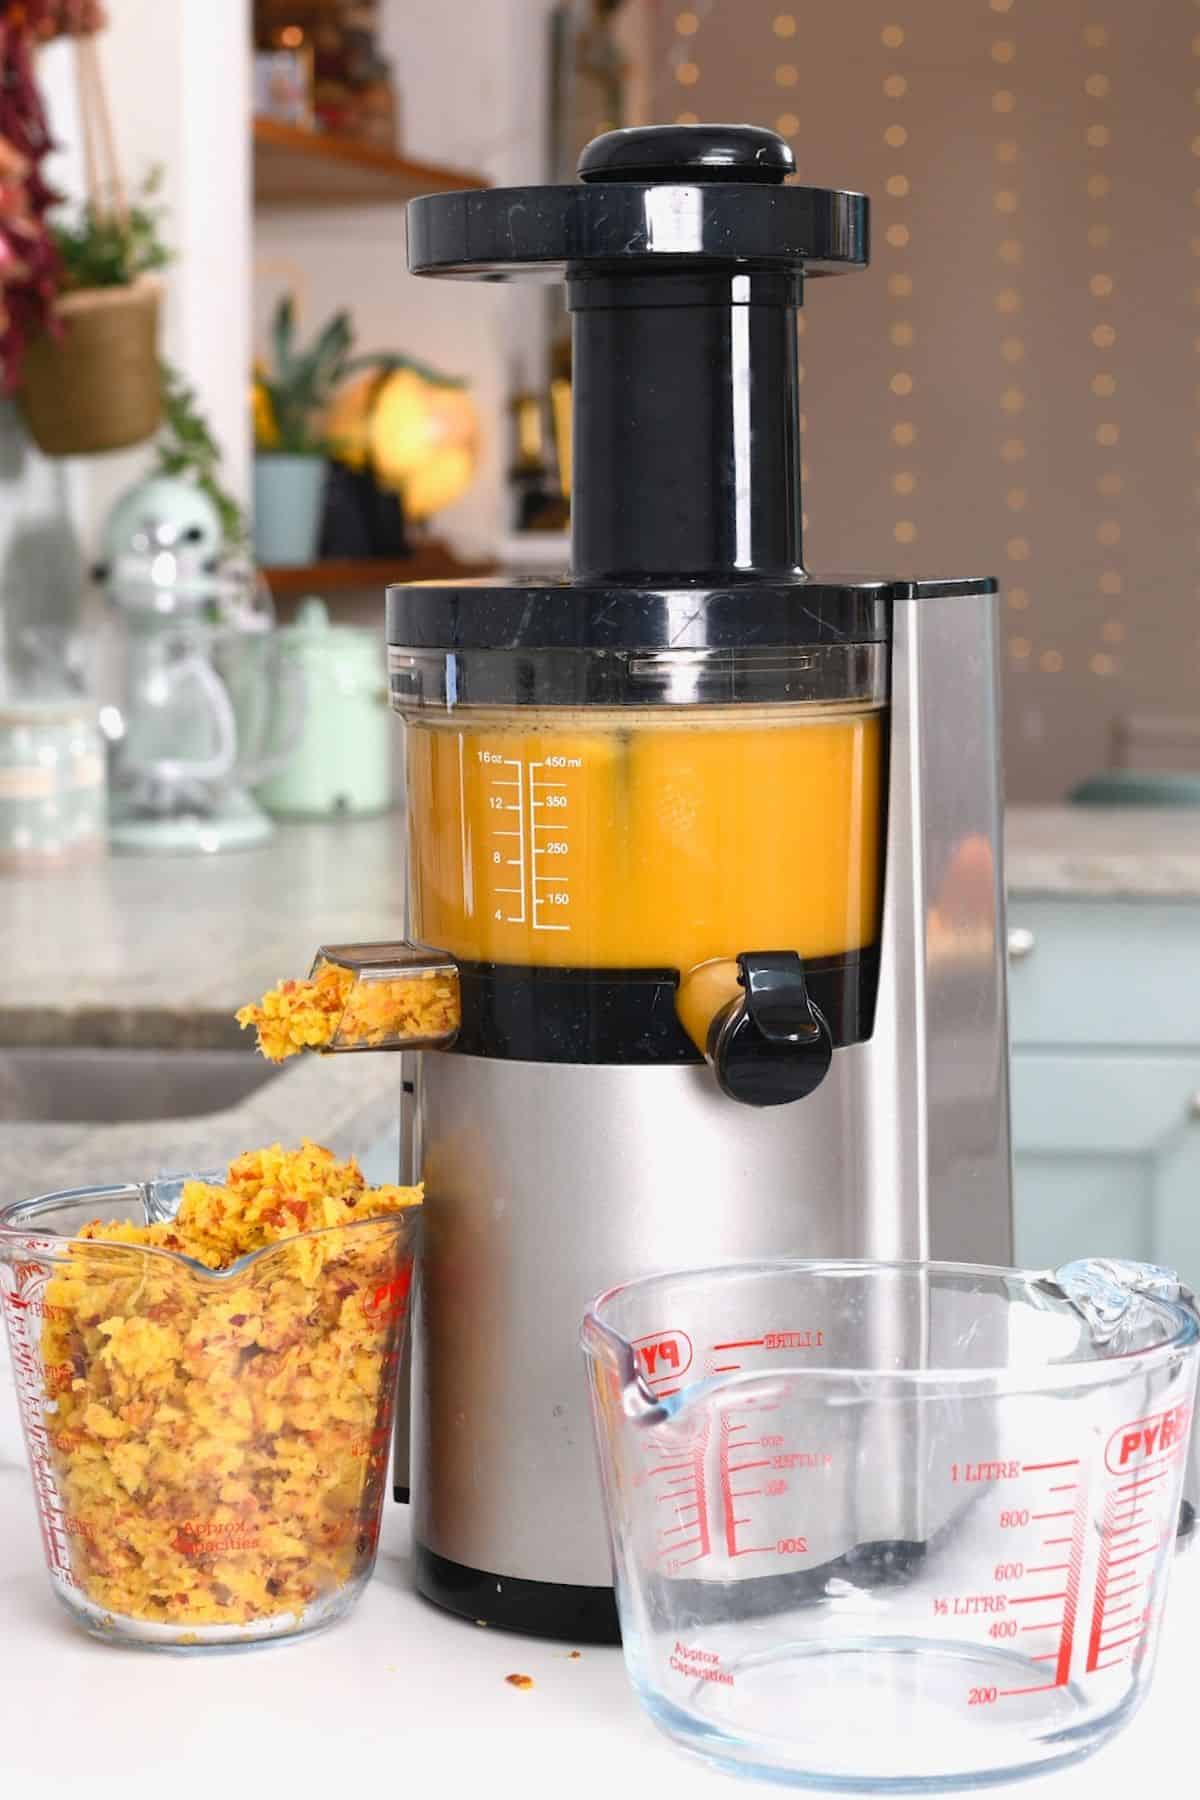 Juicing peaches with a juicer